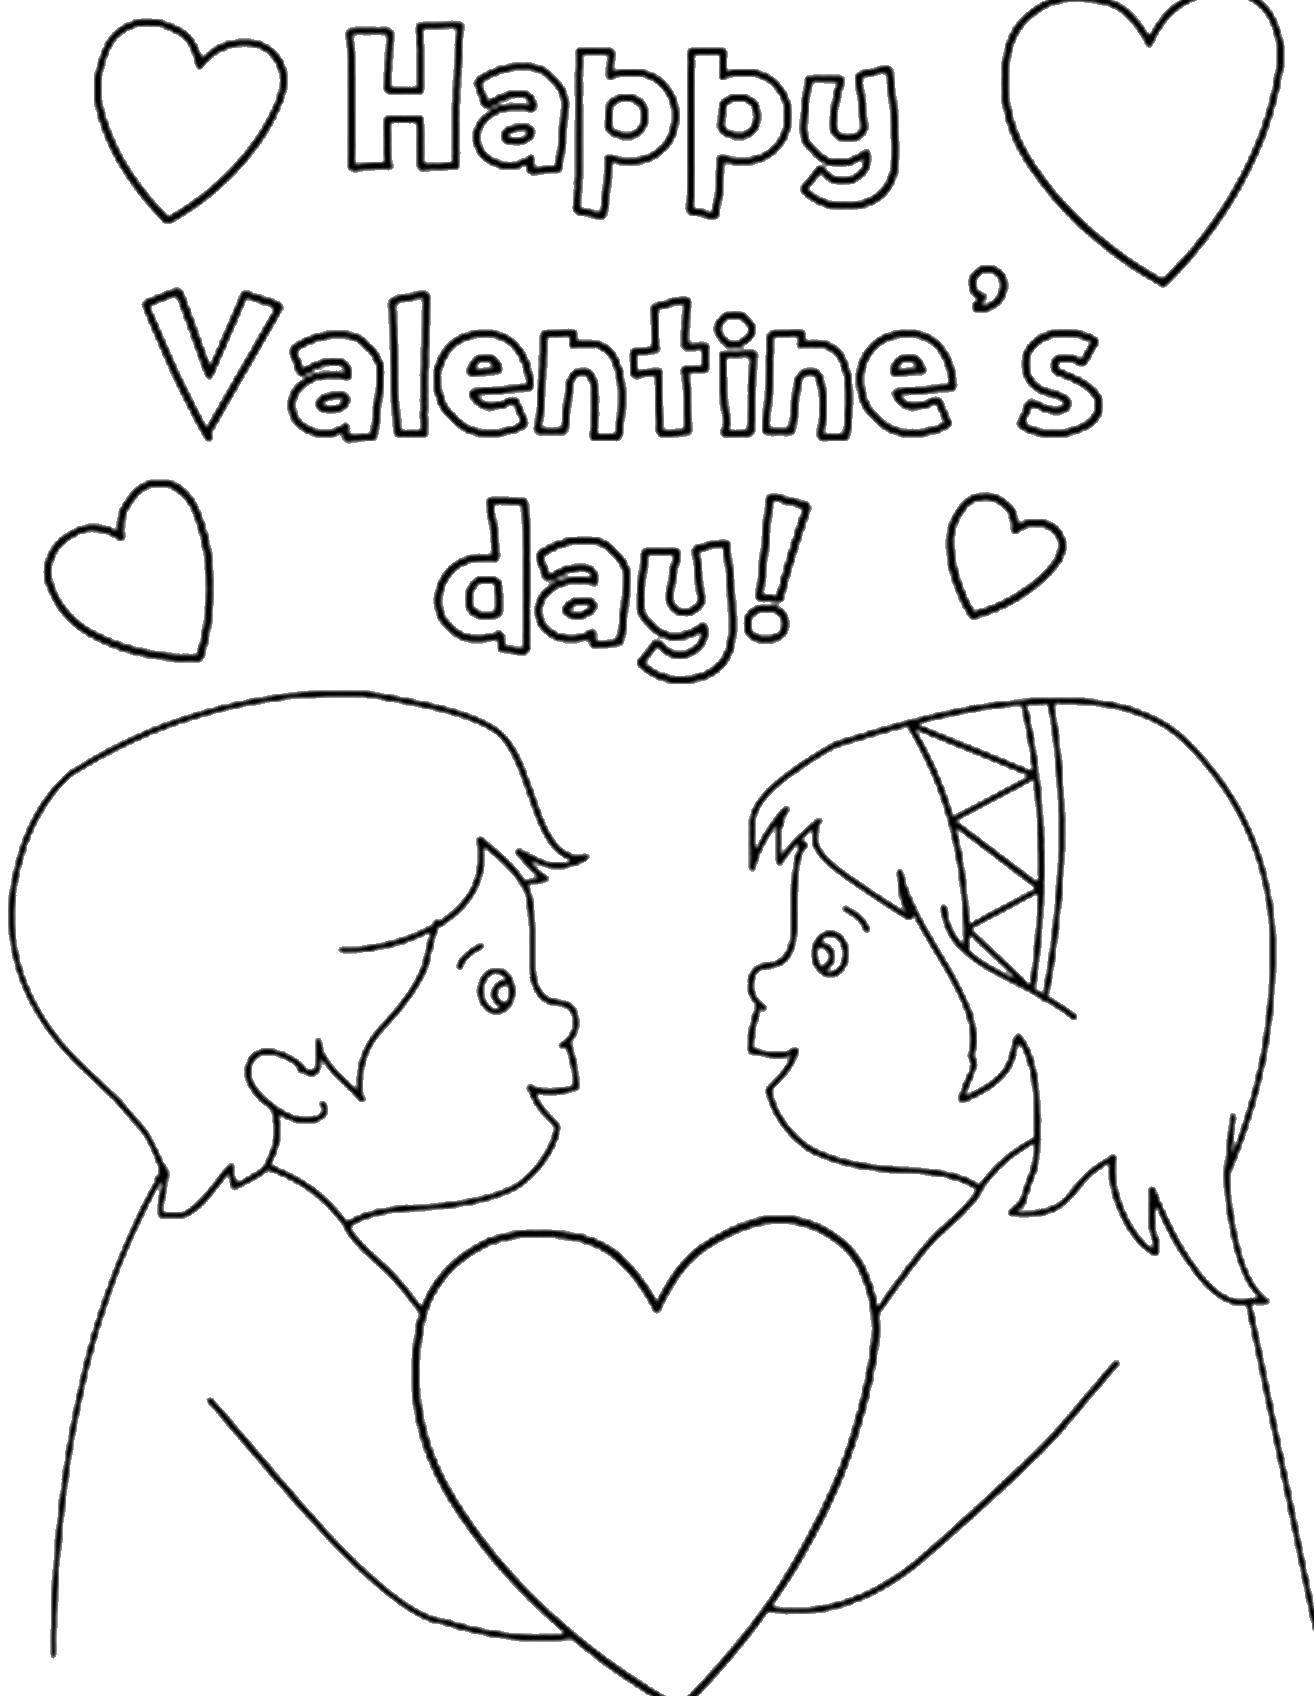 Coloring Boy and girl. Category Valentines day. Tags:  boy, girl, heart.